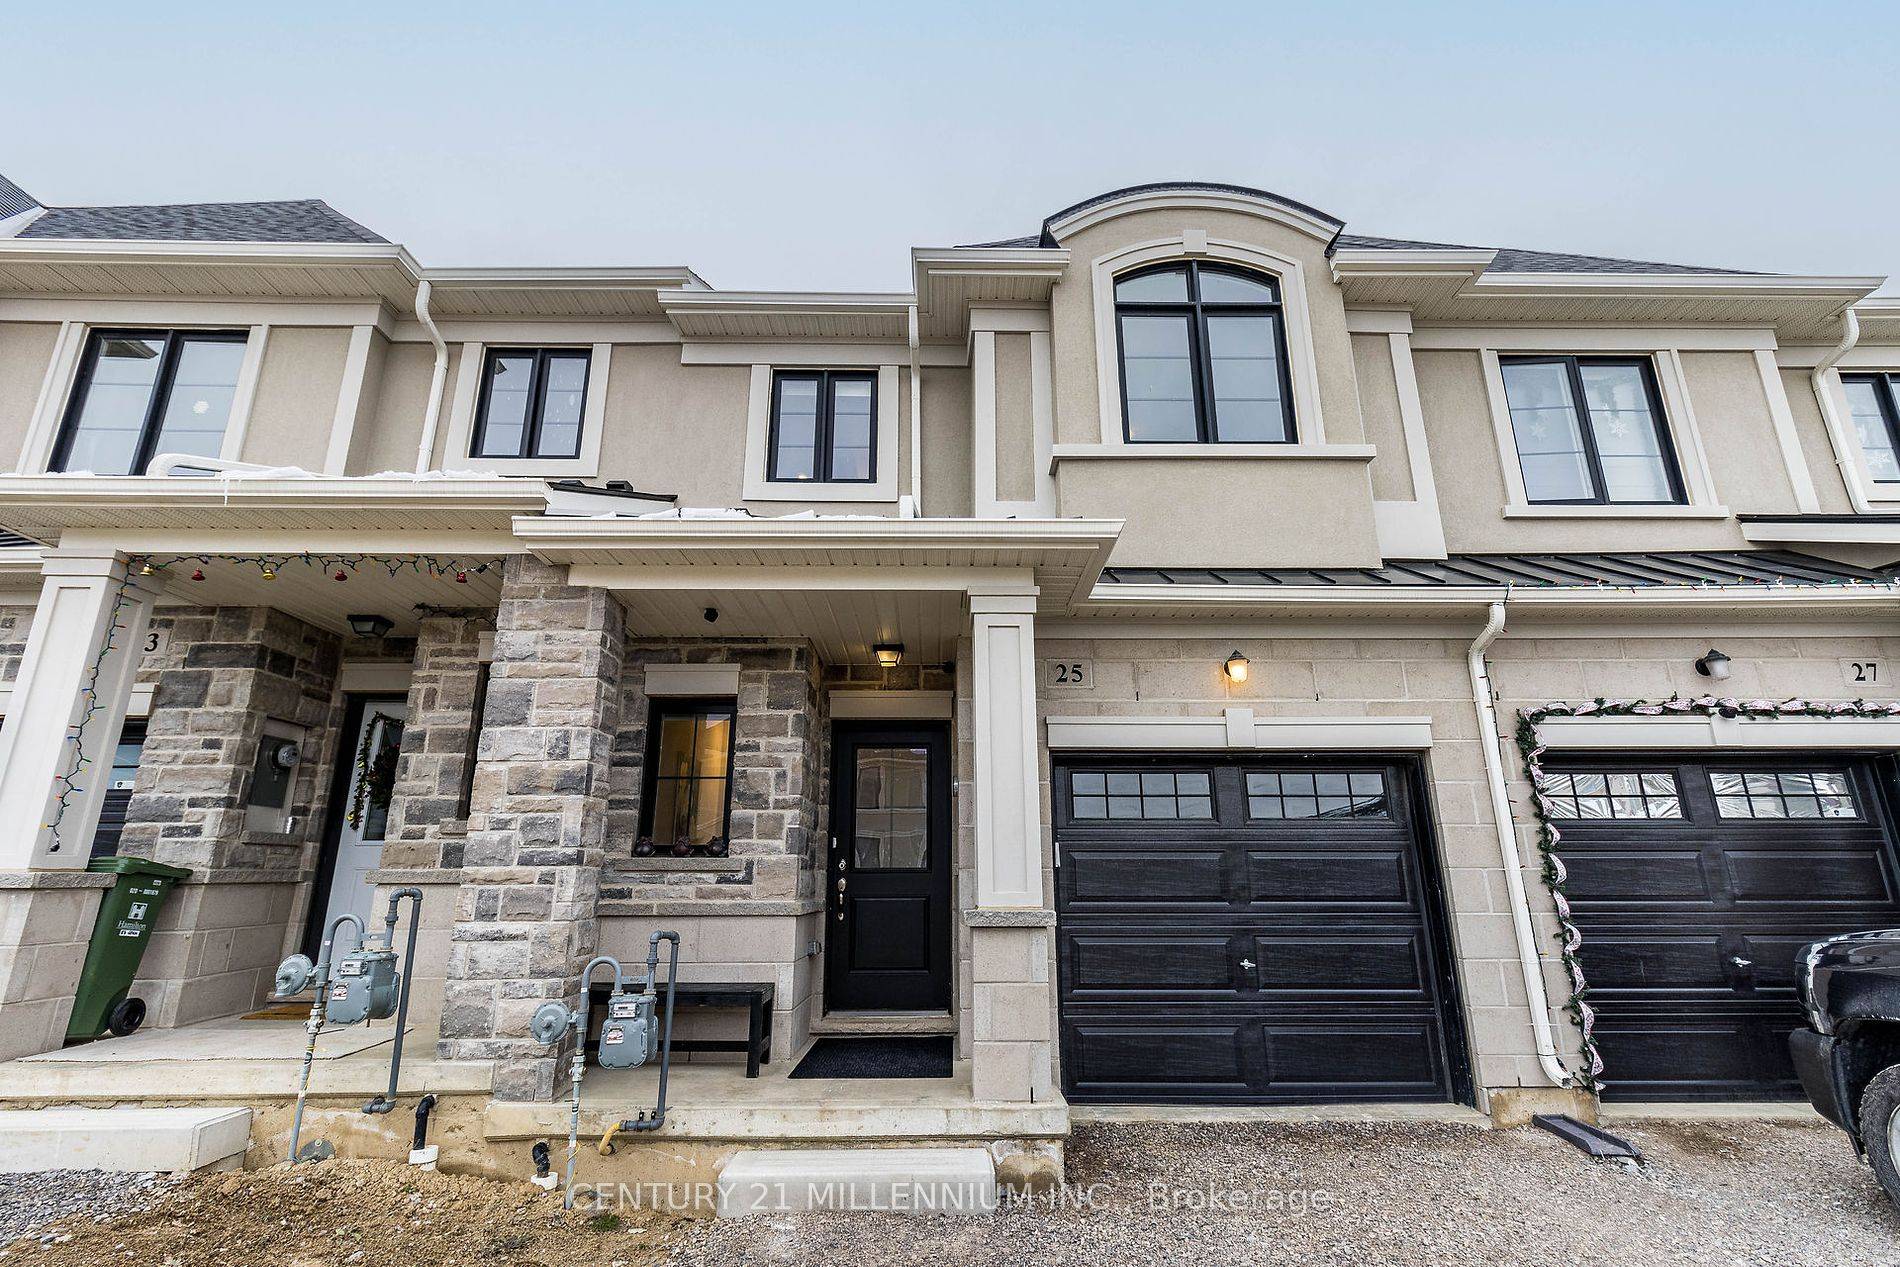 Stunning Executive 2 Storey, 3 Bed, 3 Bath, Freehold Townhome In Highly Desirable New Area.